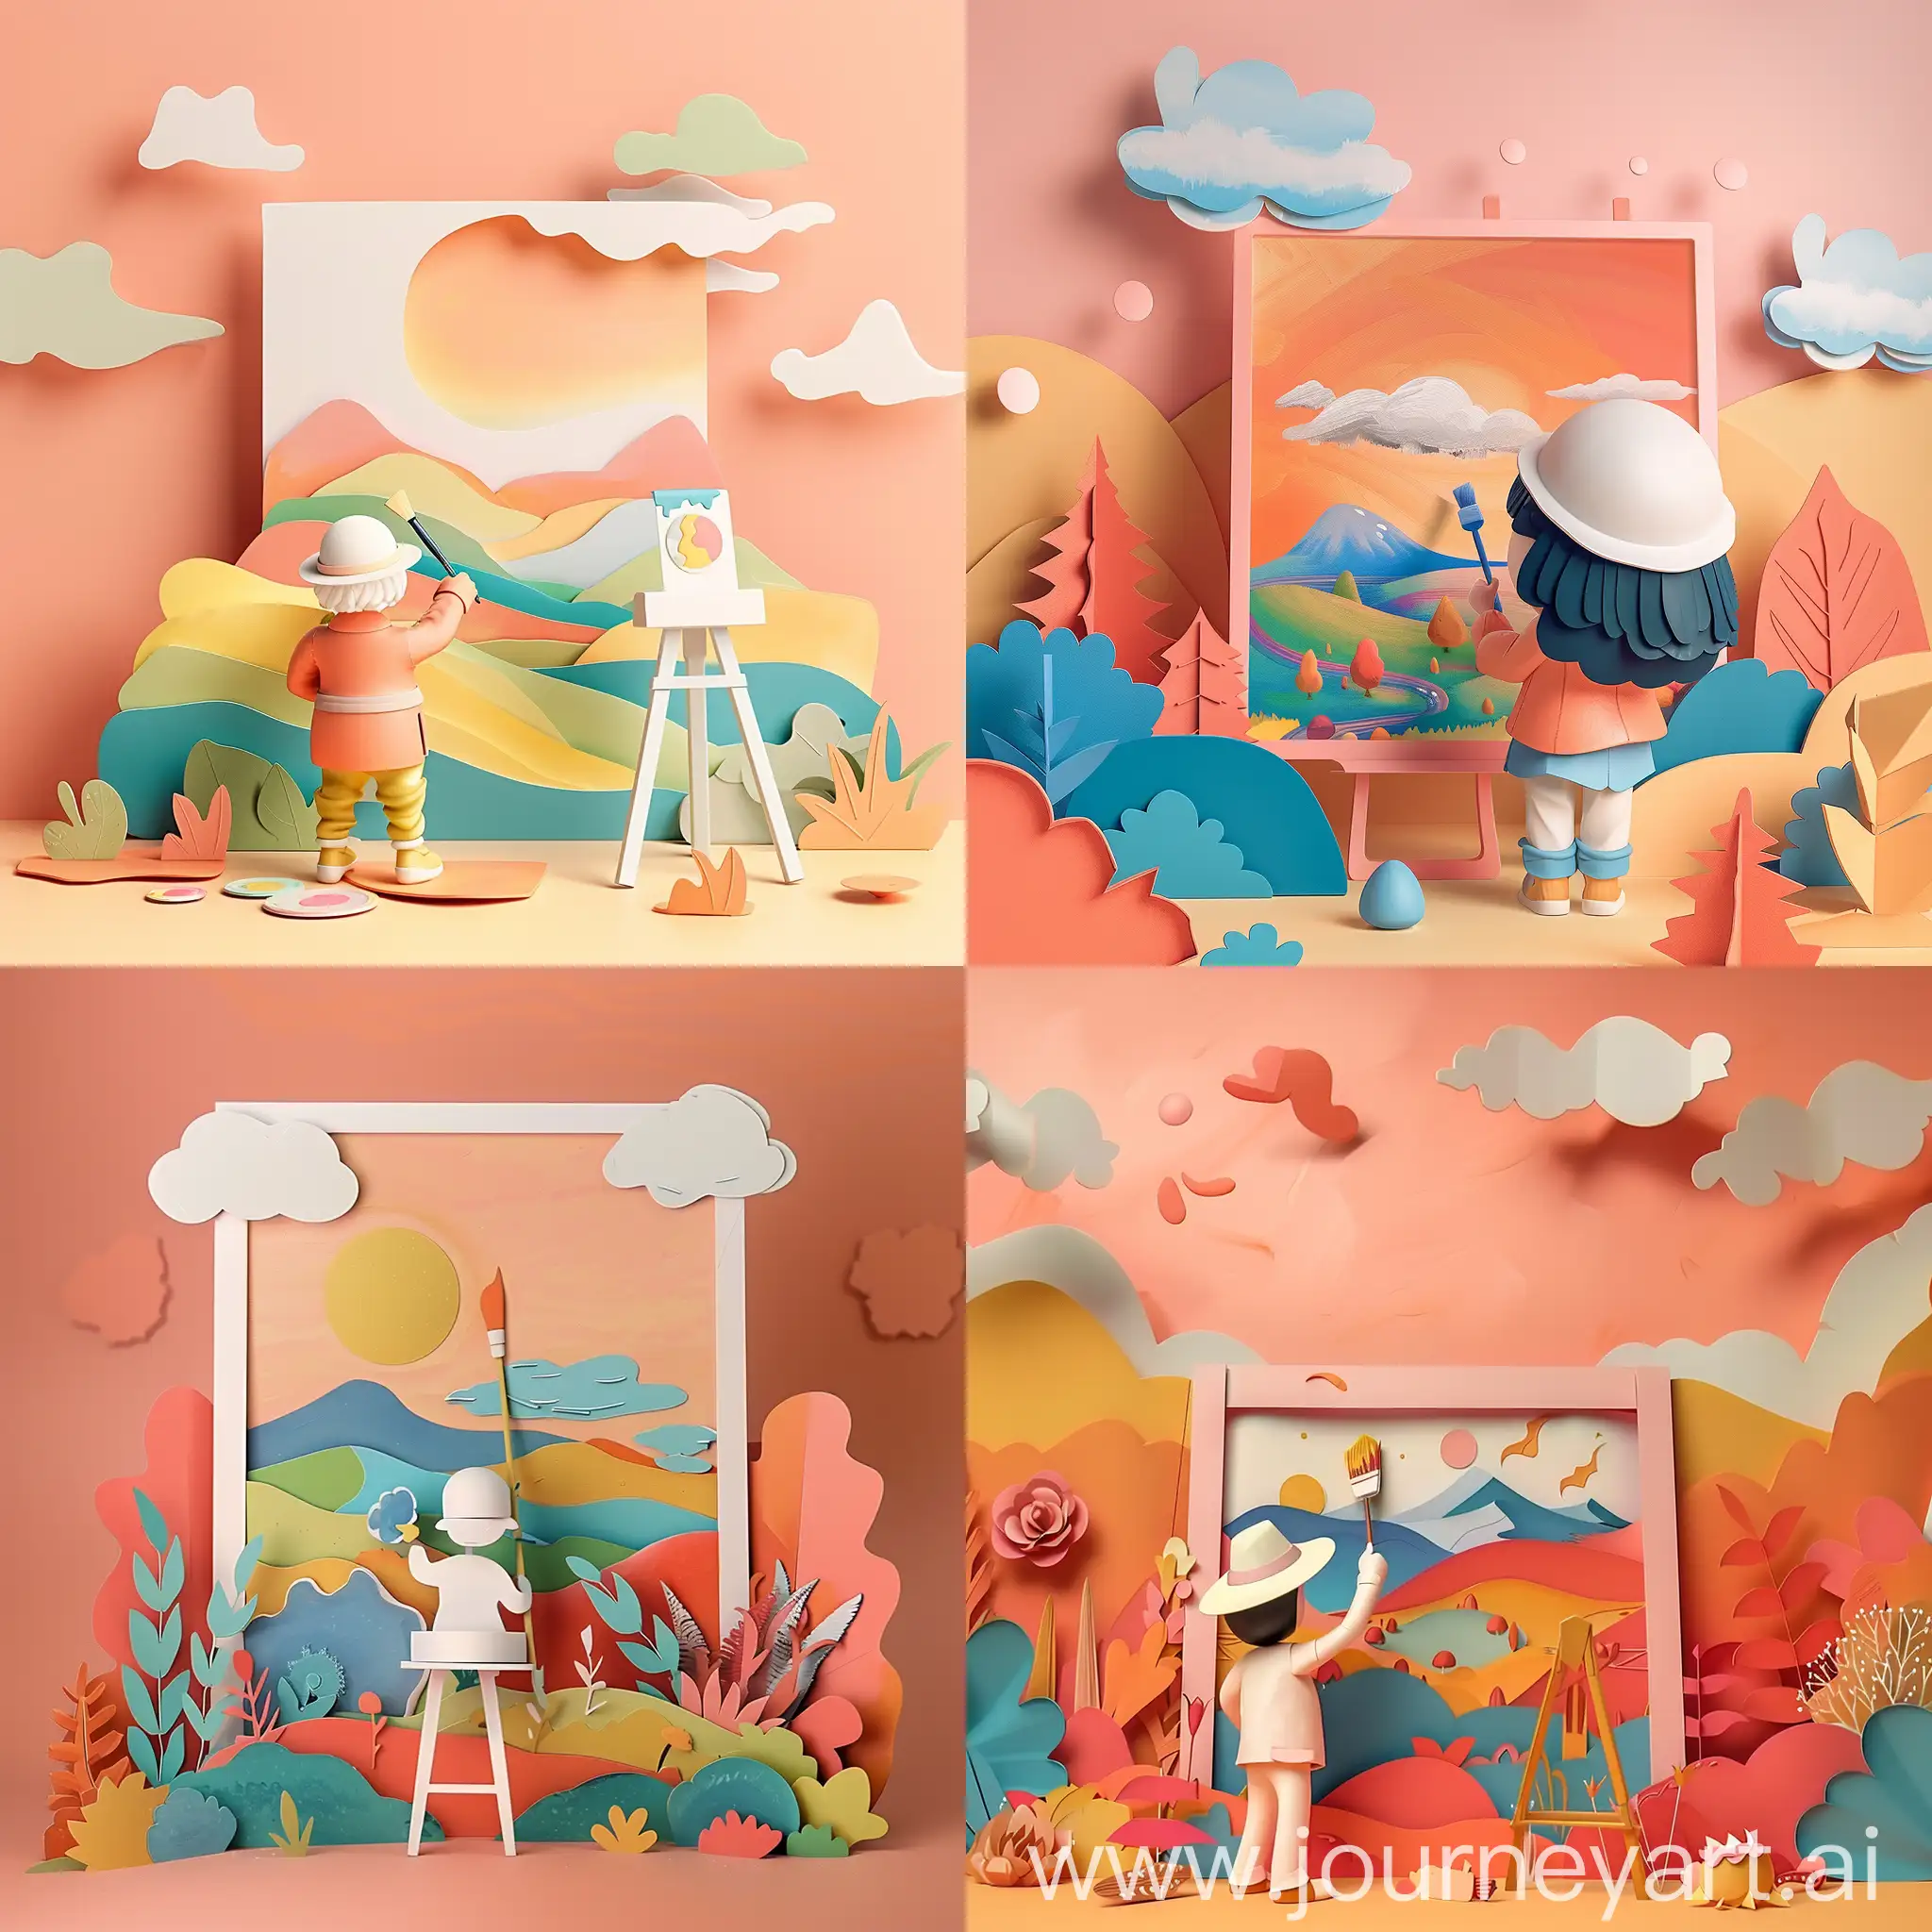 Create 3D paper layered art featuring a cartoon style artist painting a colorful landscape, under a peachy sky